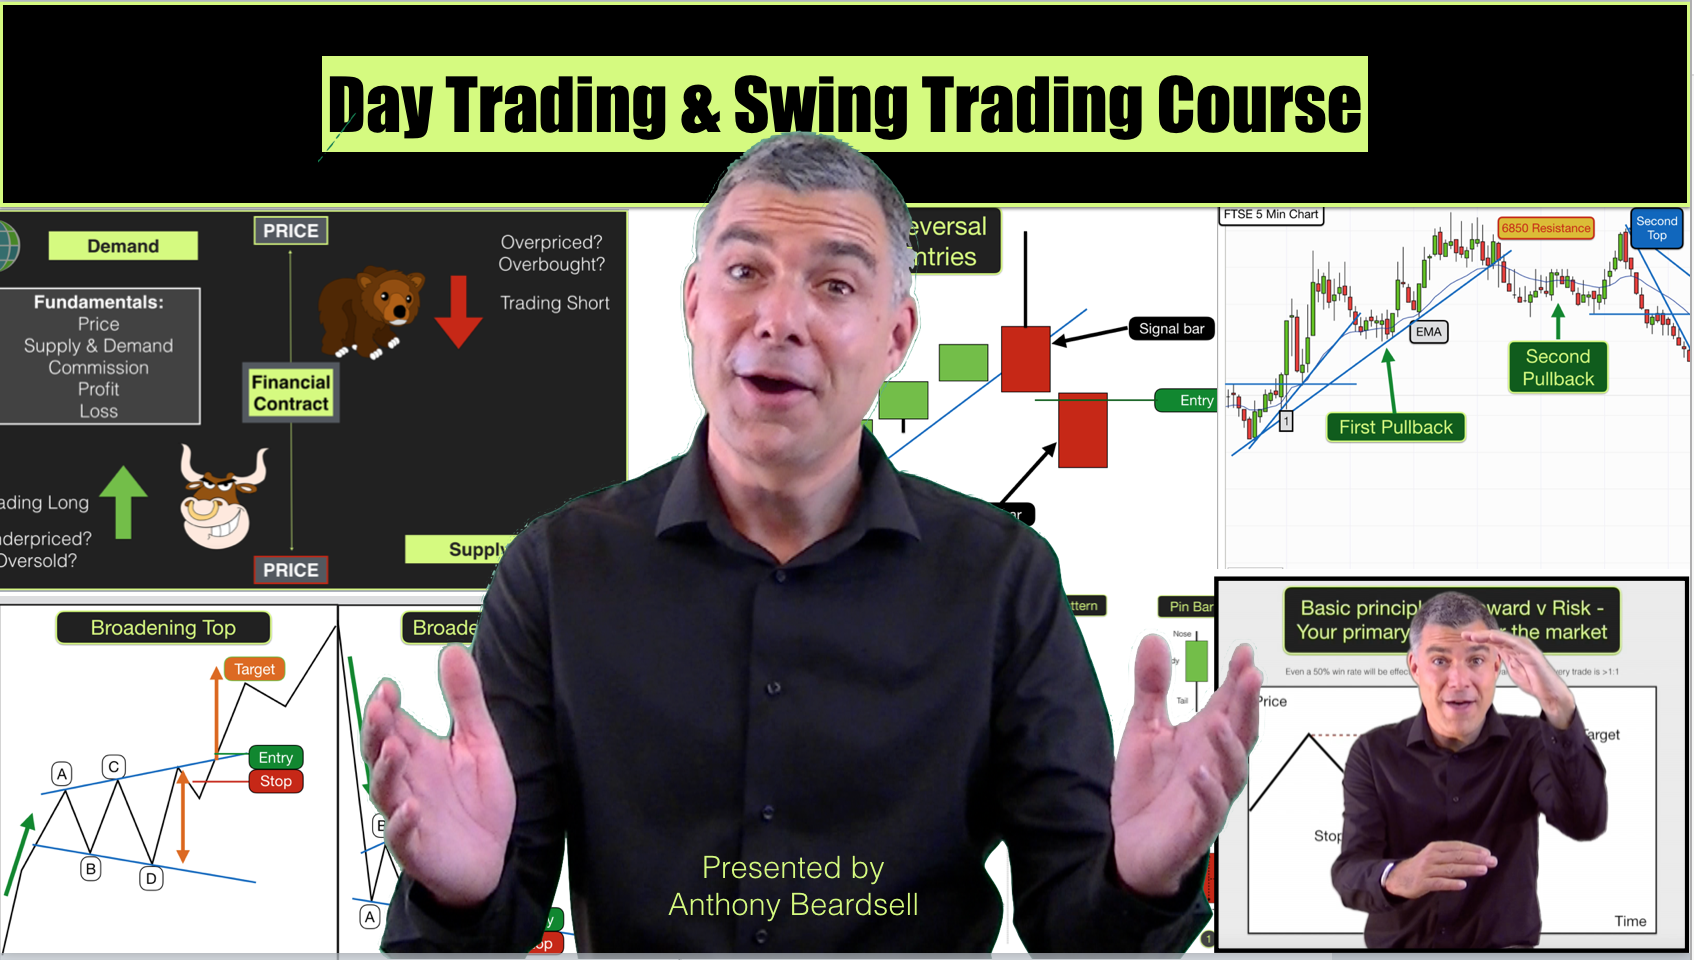 Day Trading & Swing Trading Course